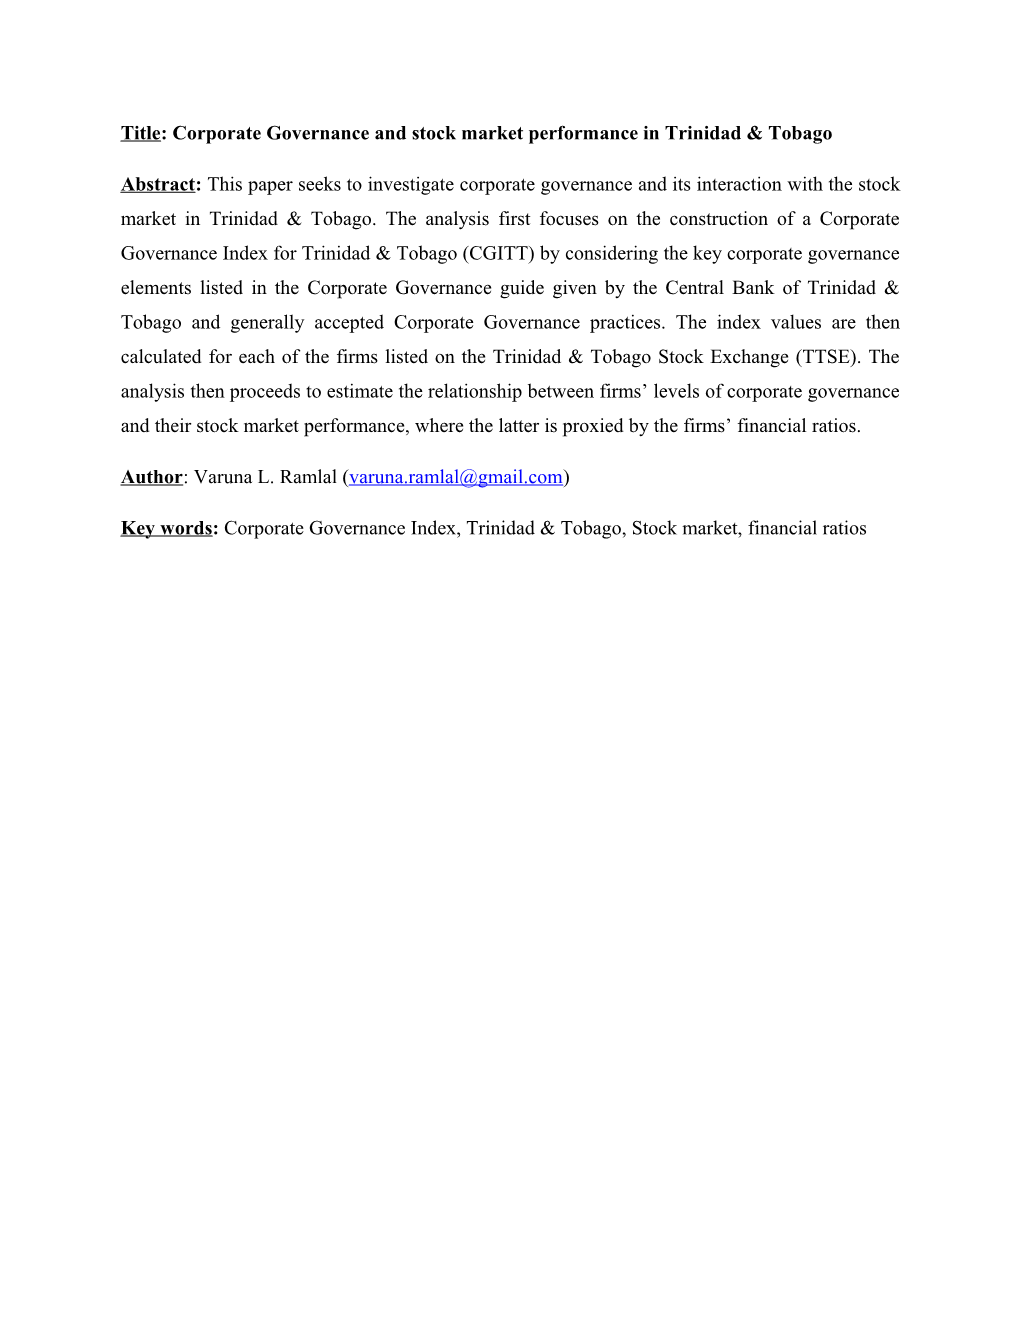 Title:Corporate Governance and Stock Market Performance in Trinidad & Tobago